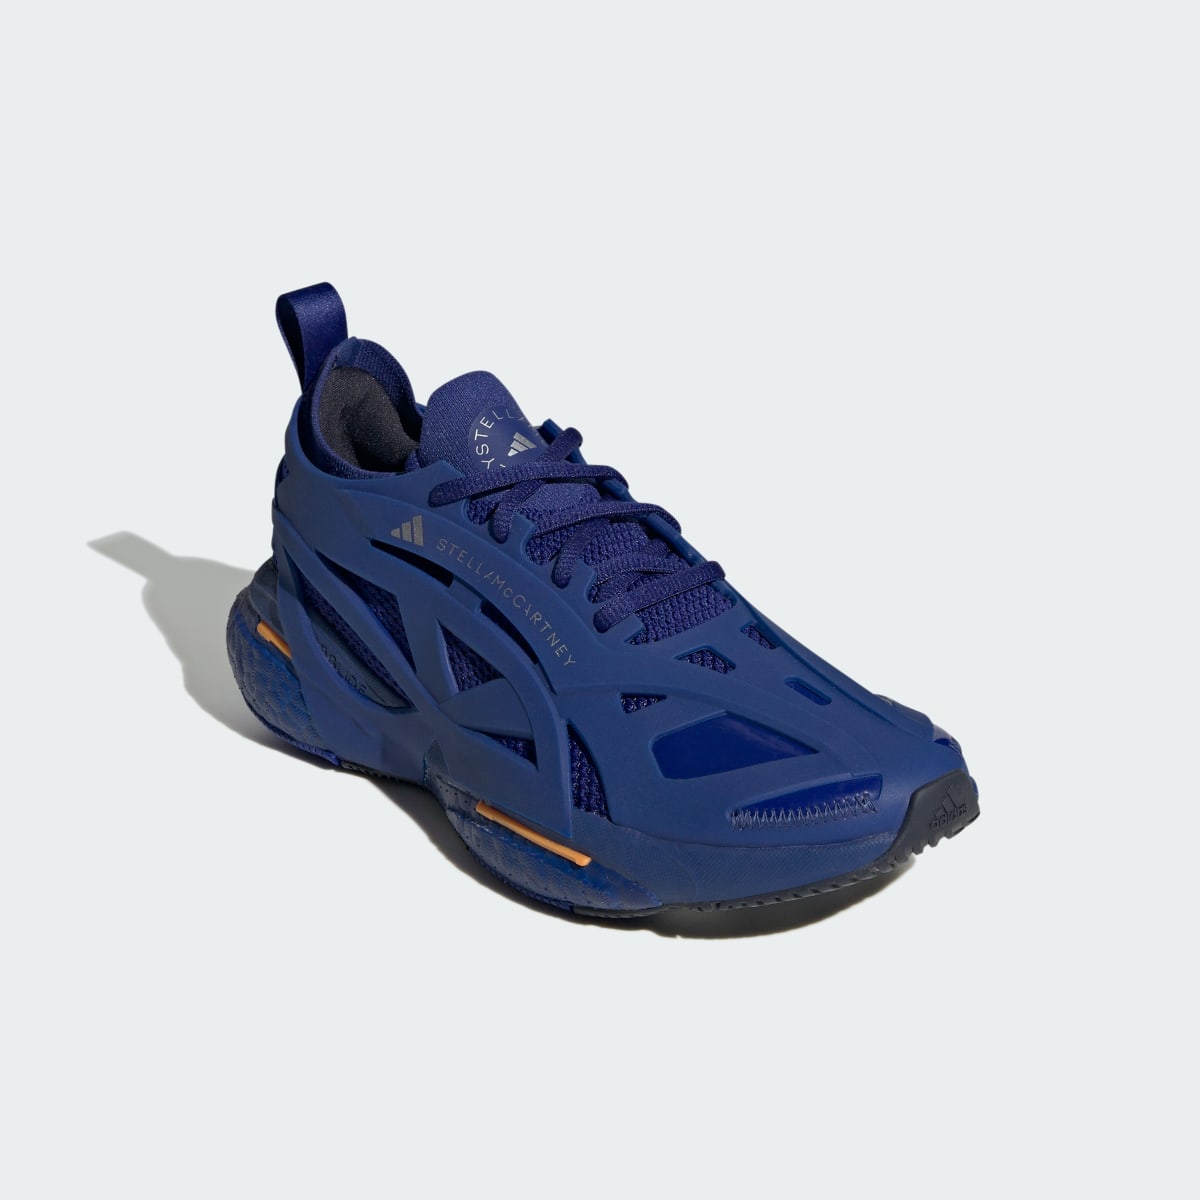 Adidas by Stella McCartney Solarglide Shoes. 5